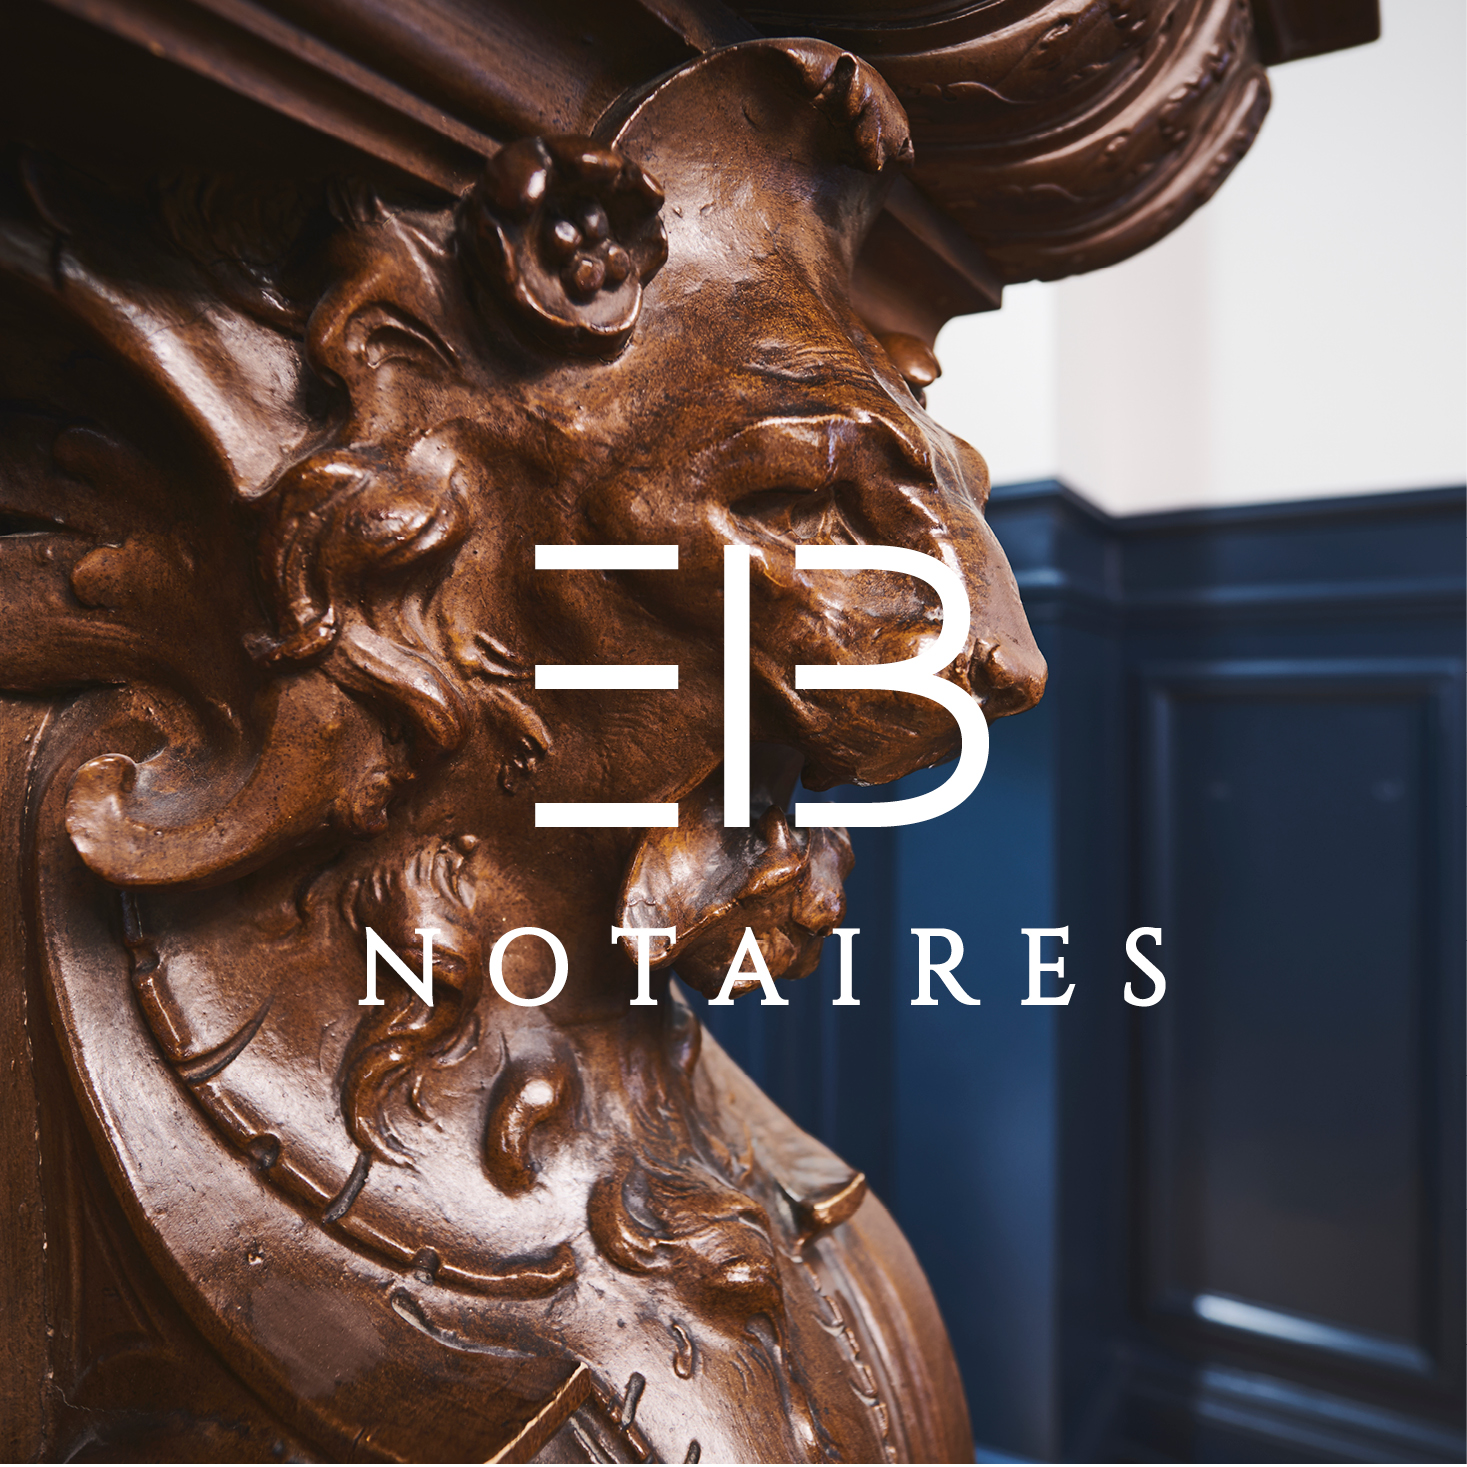 Notaires Emaille Bricard